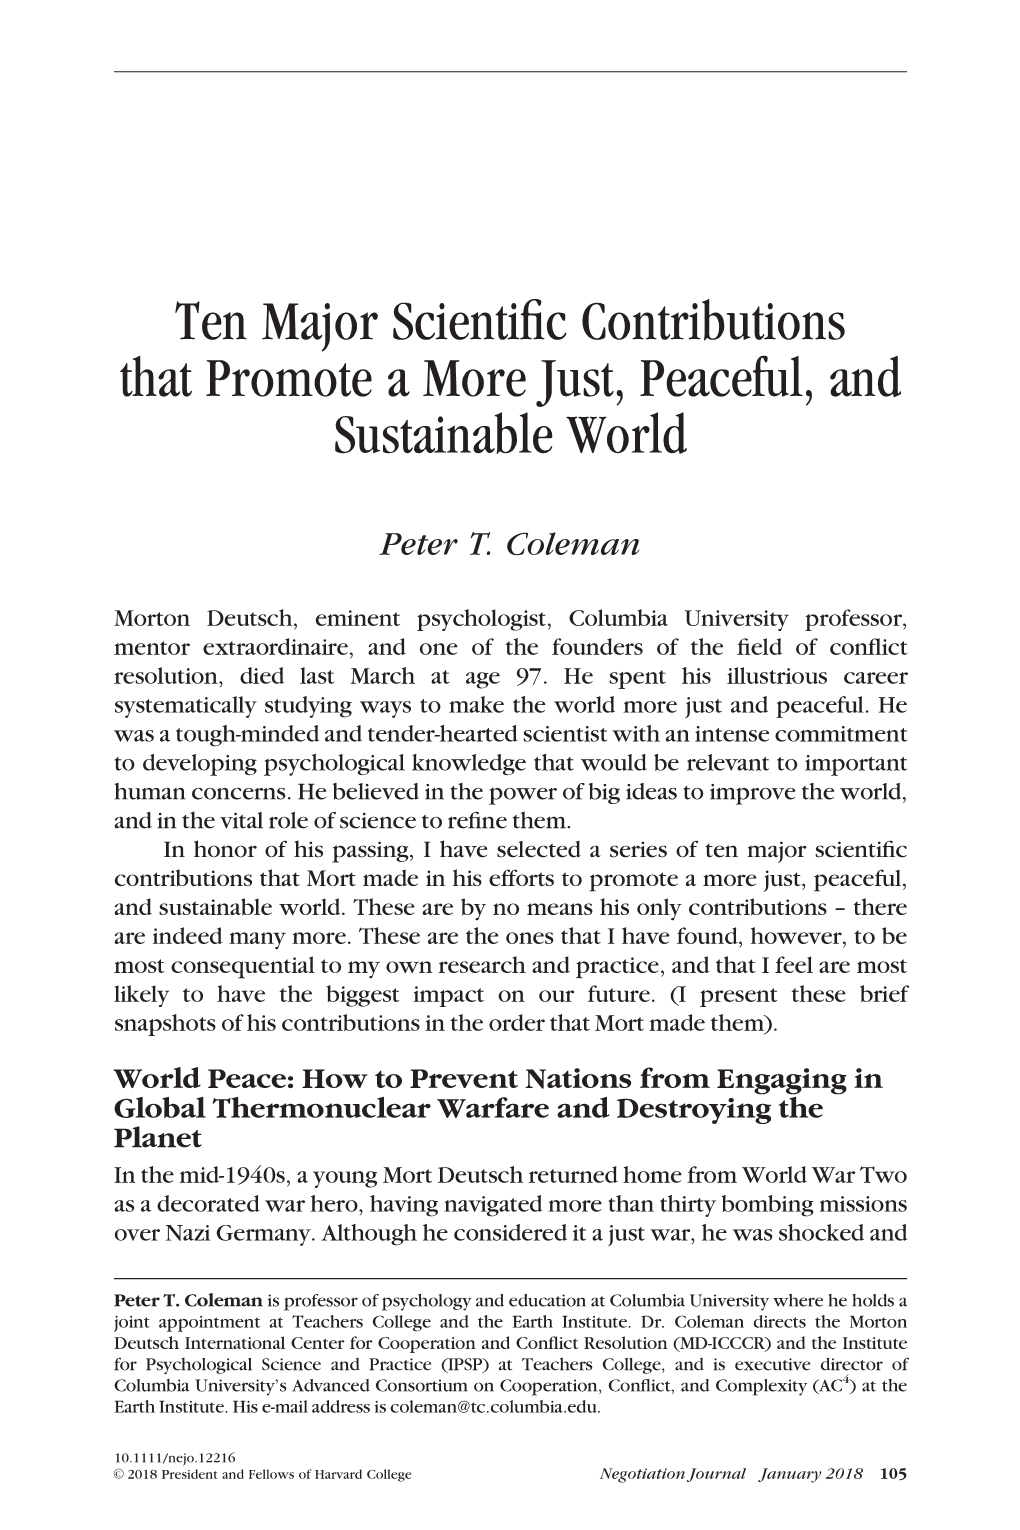 Ten Major Scientific Contributions That Promote a More Just, Peaceful, And